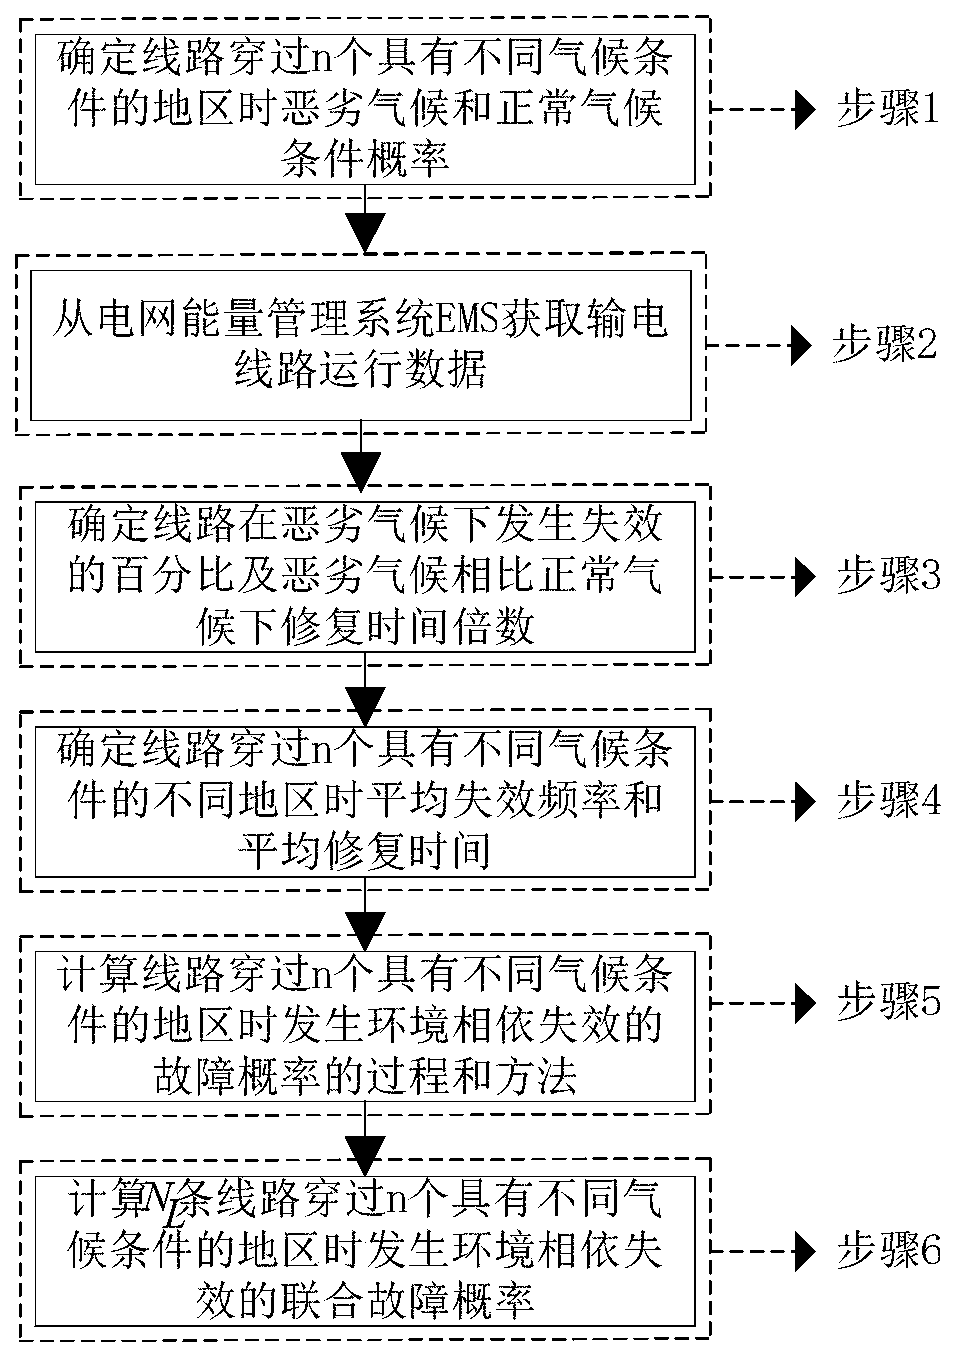 Power transmission line joint fault probability calculation method based on environment dependent failure